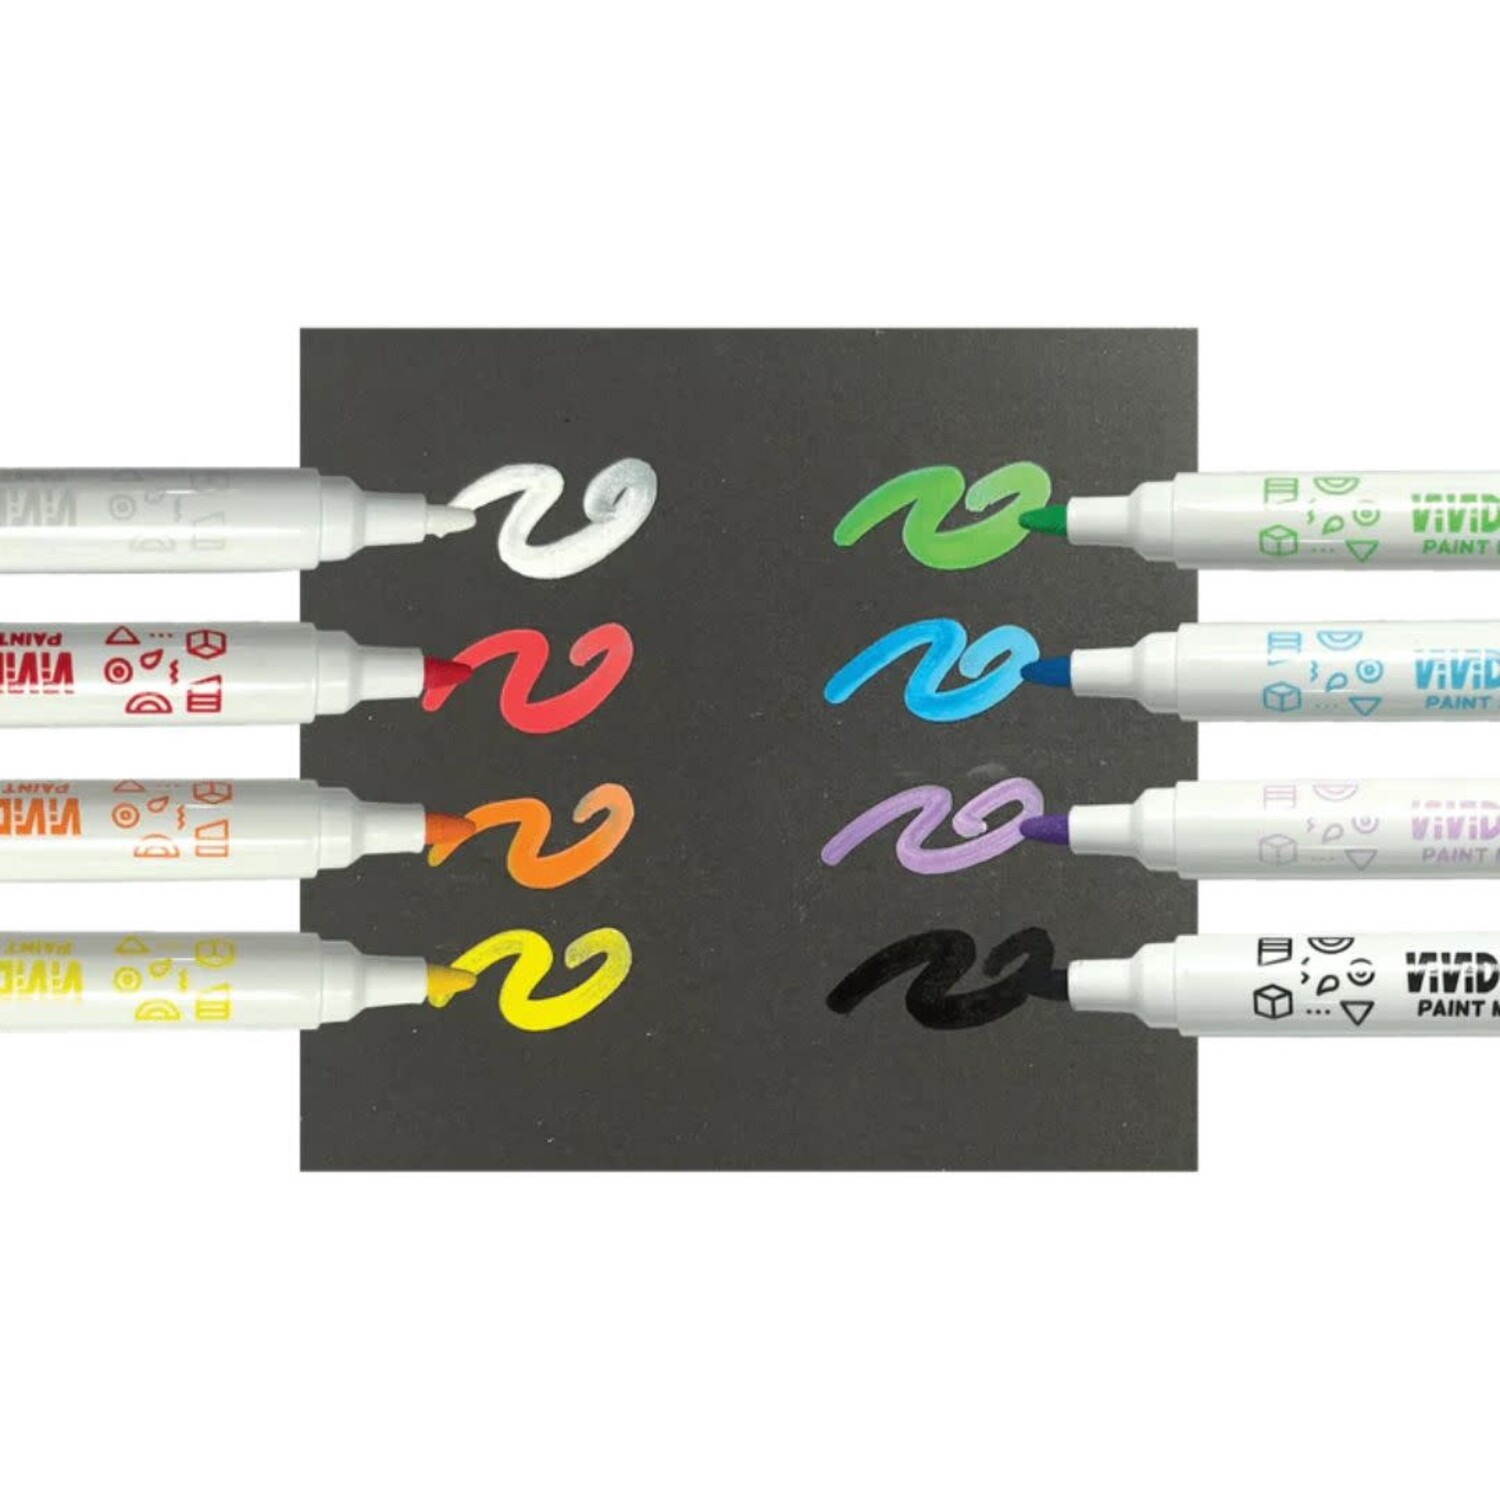 Vivid Pop Paint Markers - Mudpuddles Toys and Books